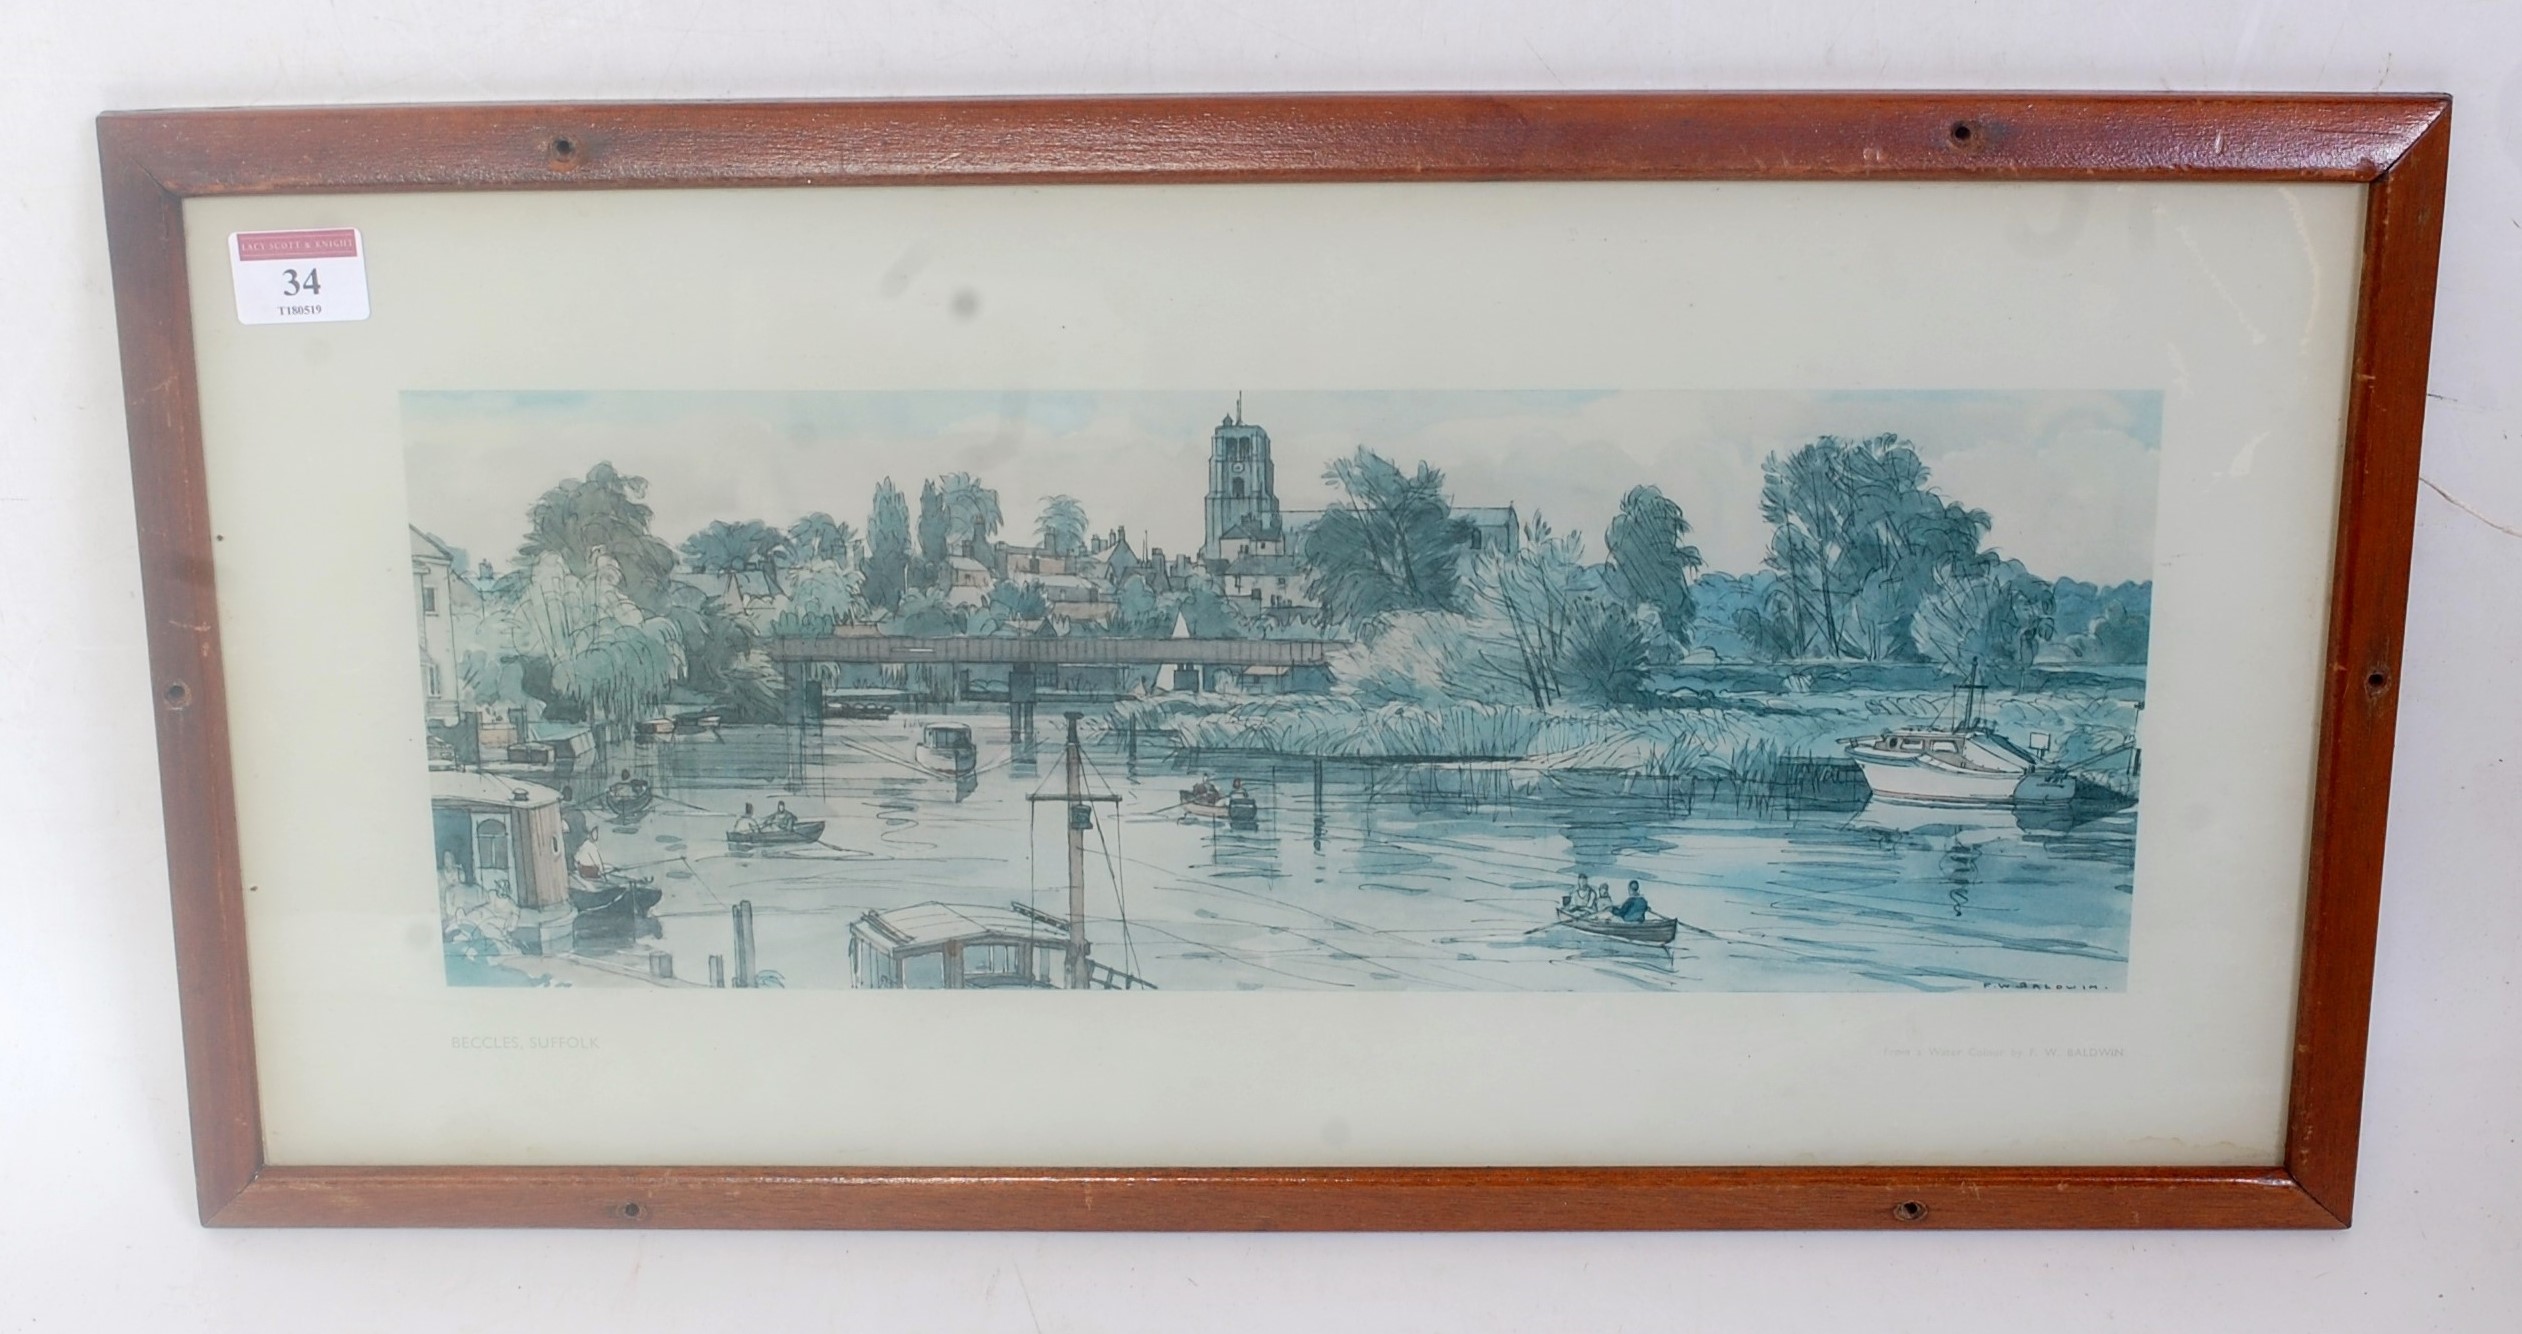 Carriage print showing Beccles, Suffolk, from river Waveney after FW Baldwin, original frame and